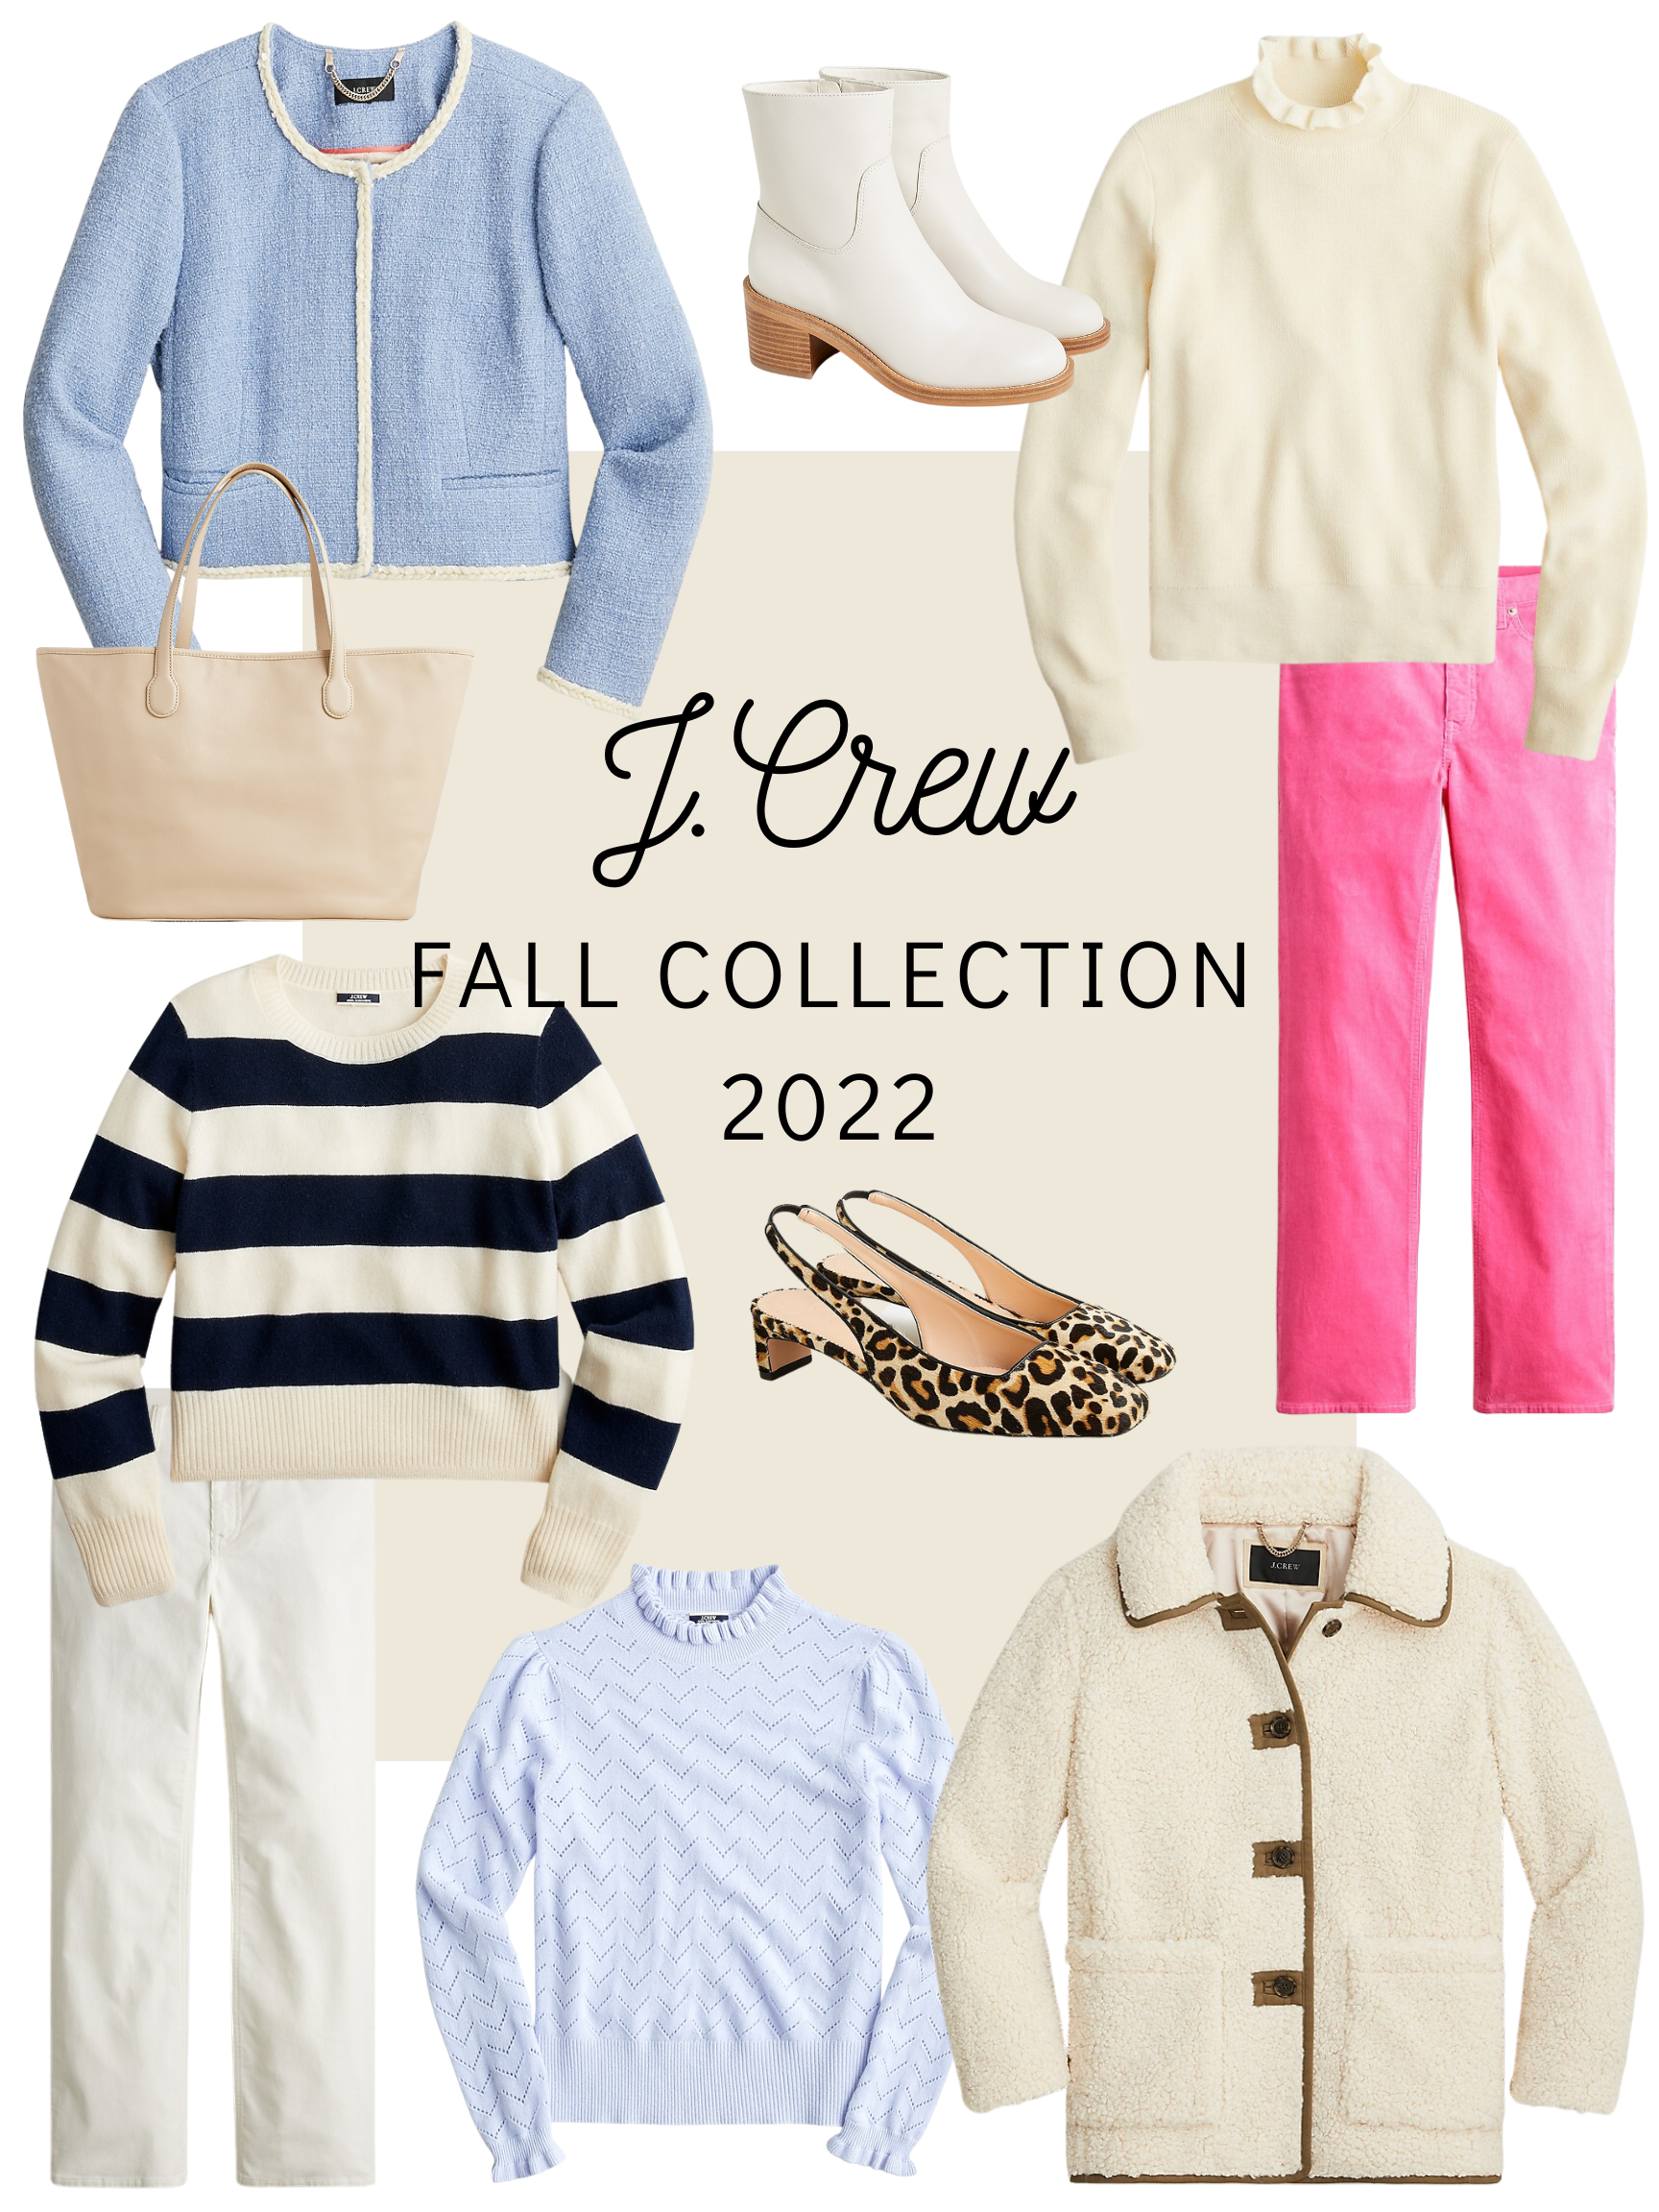 THIS NEW J.CREW FALL COLLECTION IS TOO GOOD TO BE TRUE